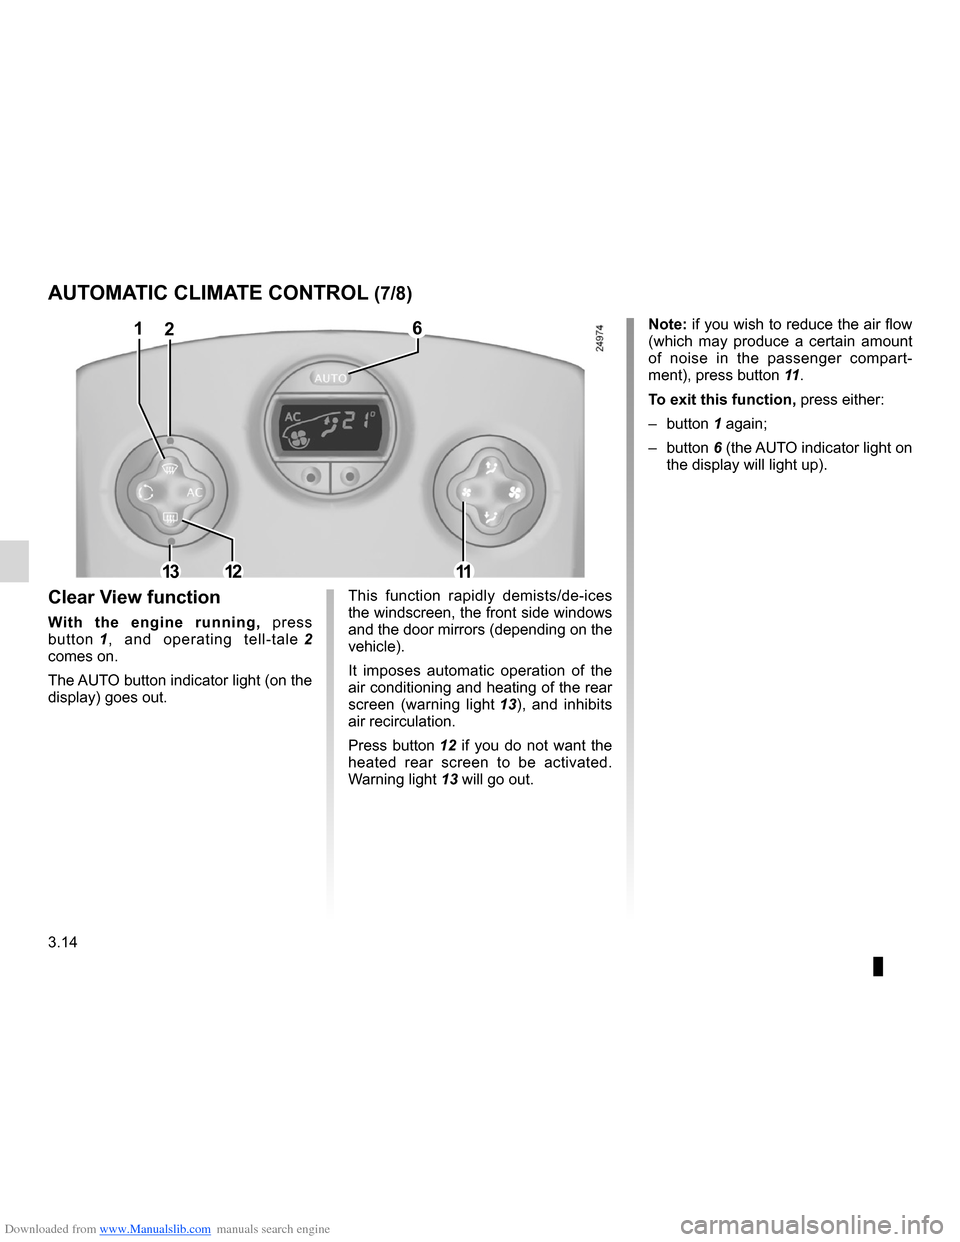 RENAULT CLIO 2012 X85 / 3.G User Guide Downloaded from www.Manualslib.com manuals search engine demistingwindscreen  ....................................................... (current page)
3.14
ENG_UD19787_3
Air conditionné automatique (X8